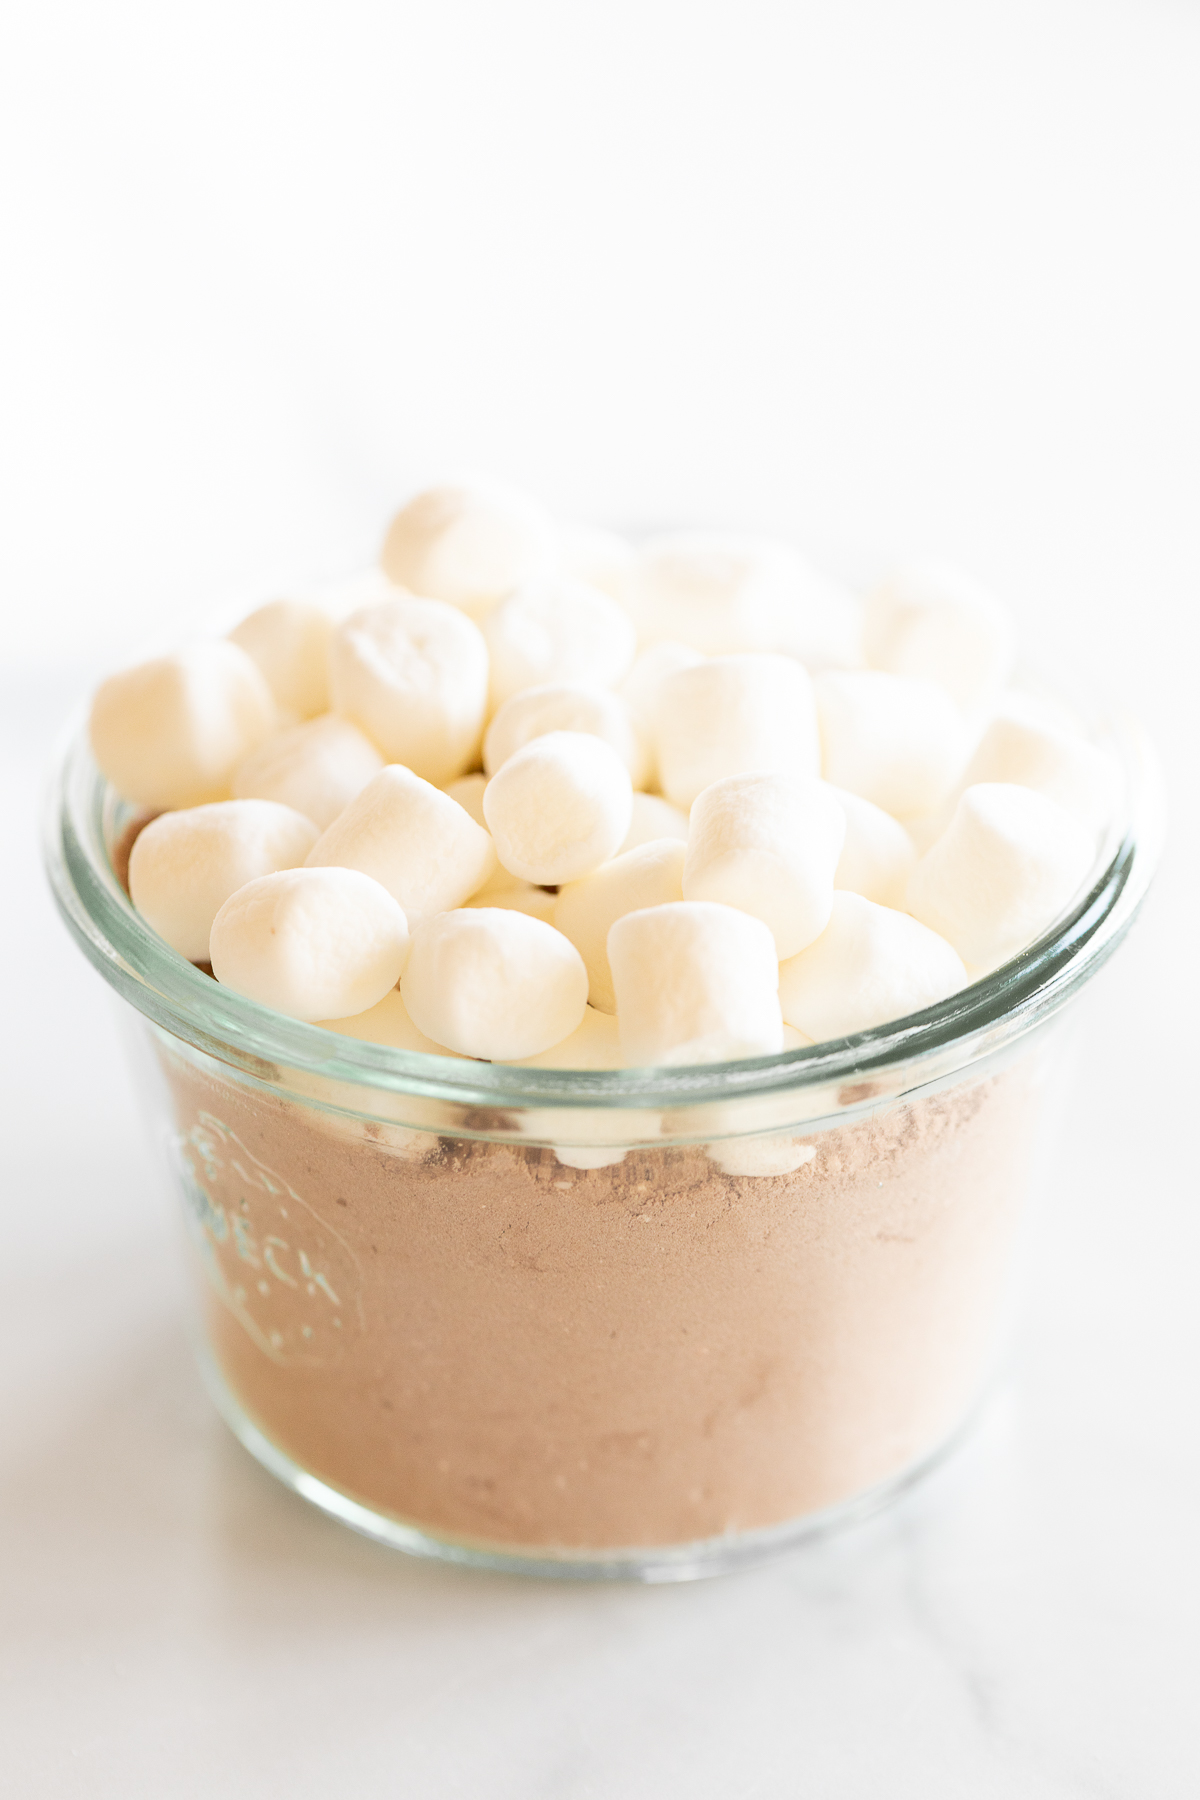 The best homemade hot chocolate mix, lovingly prepared in a glass bowl filled with delectable chocolate and fluffy marshmallows.